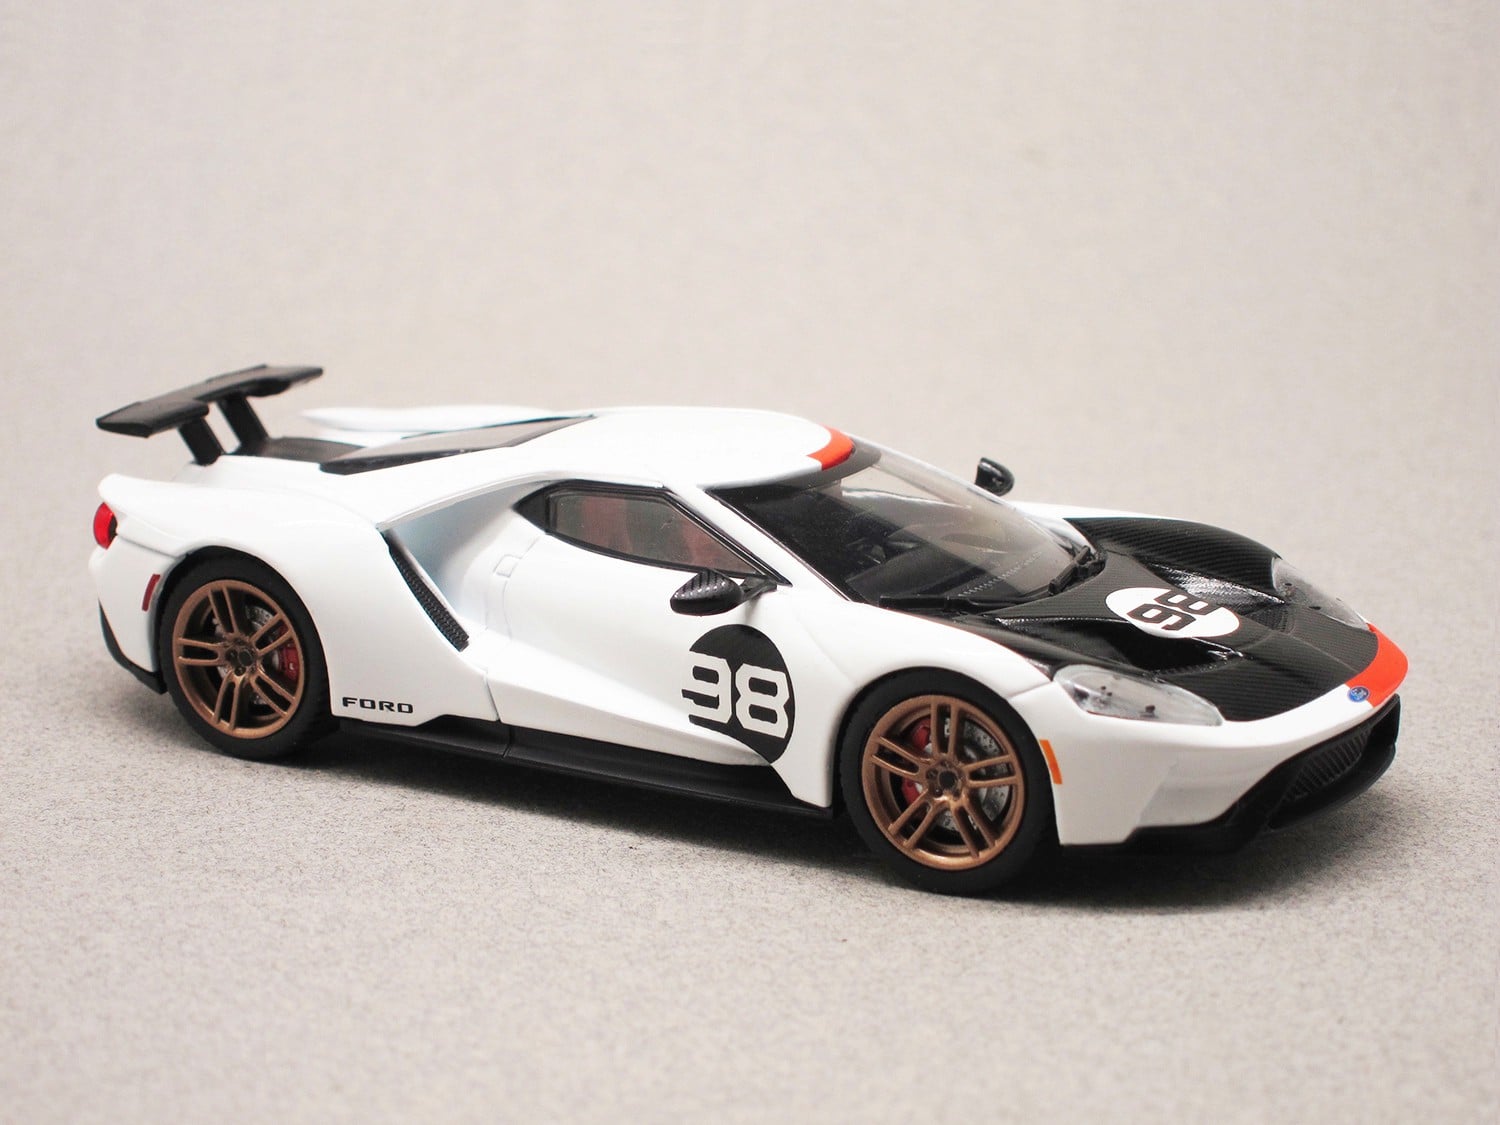 Ford GT Heritage Edition n°98 (Greenlight) 1:43